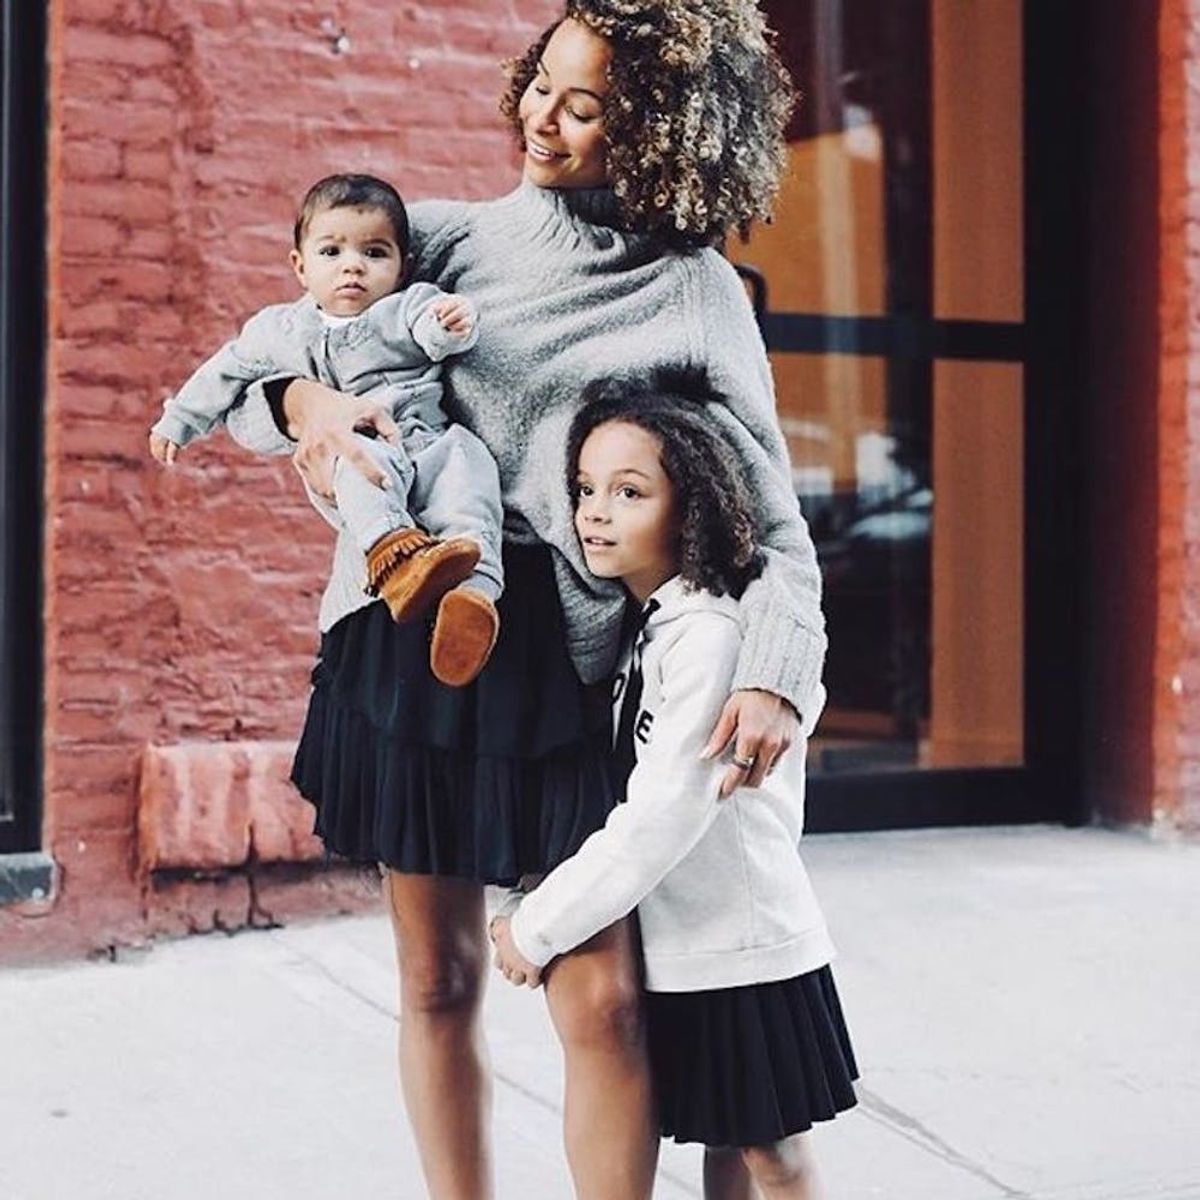 11 Surprisingly Chic Ways to Match Your Family’s Outfits for Holiday Photos